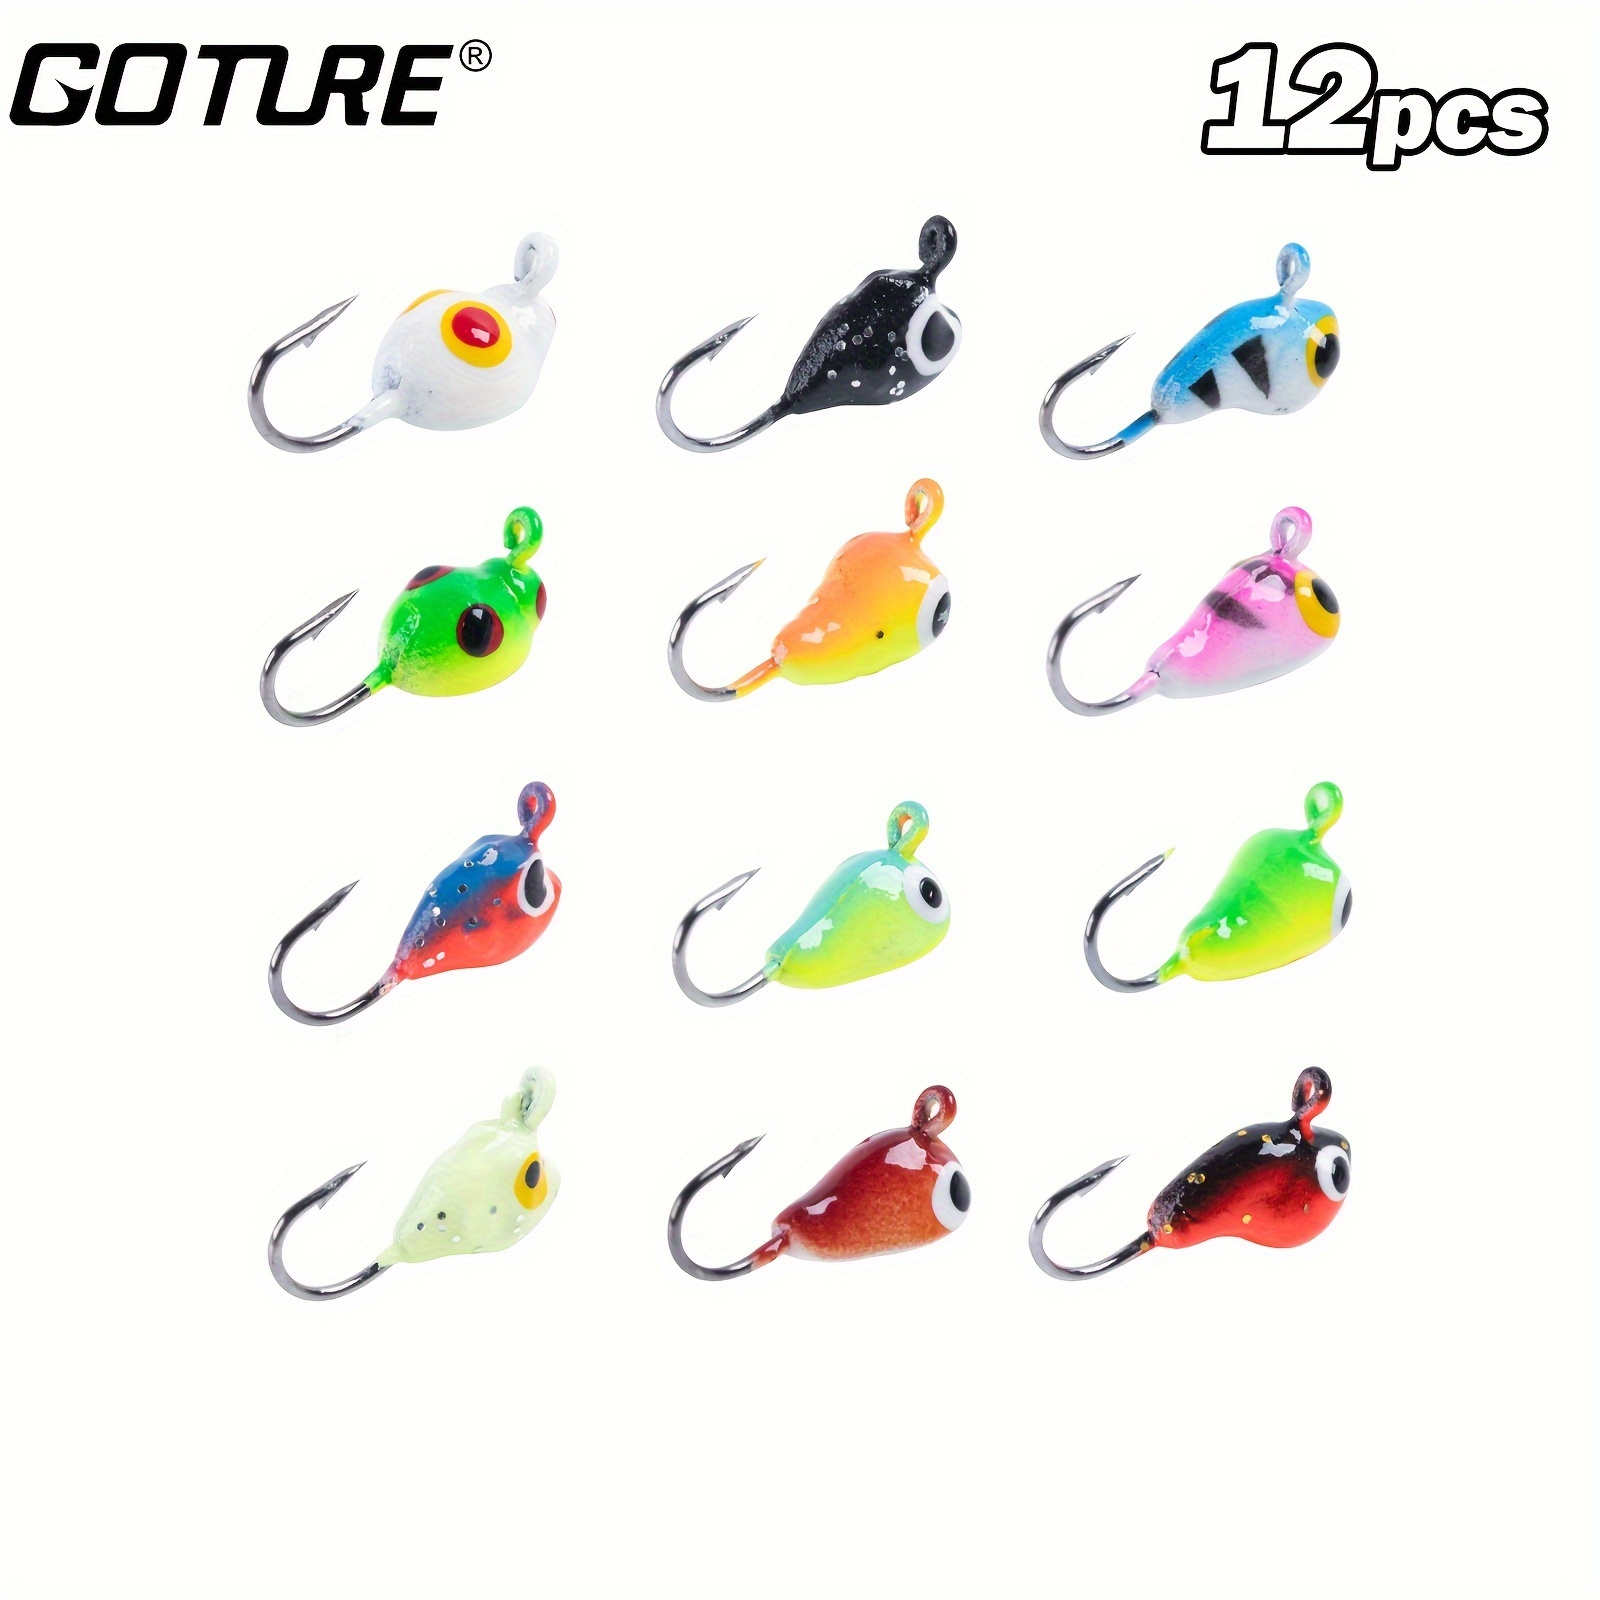 * 12pcs Ice Fishing Jigs Kit, Fast Sinking Ice Fishing Bait Hook For Bass  Pike Trout Walleye Crappie Panfish, Winter Ice Fishing Lures